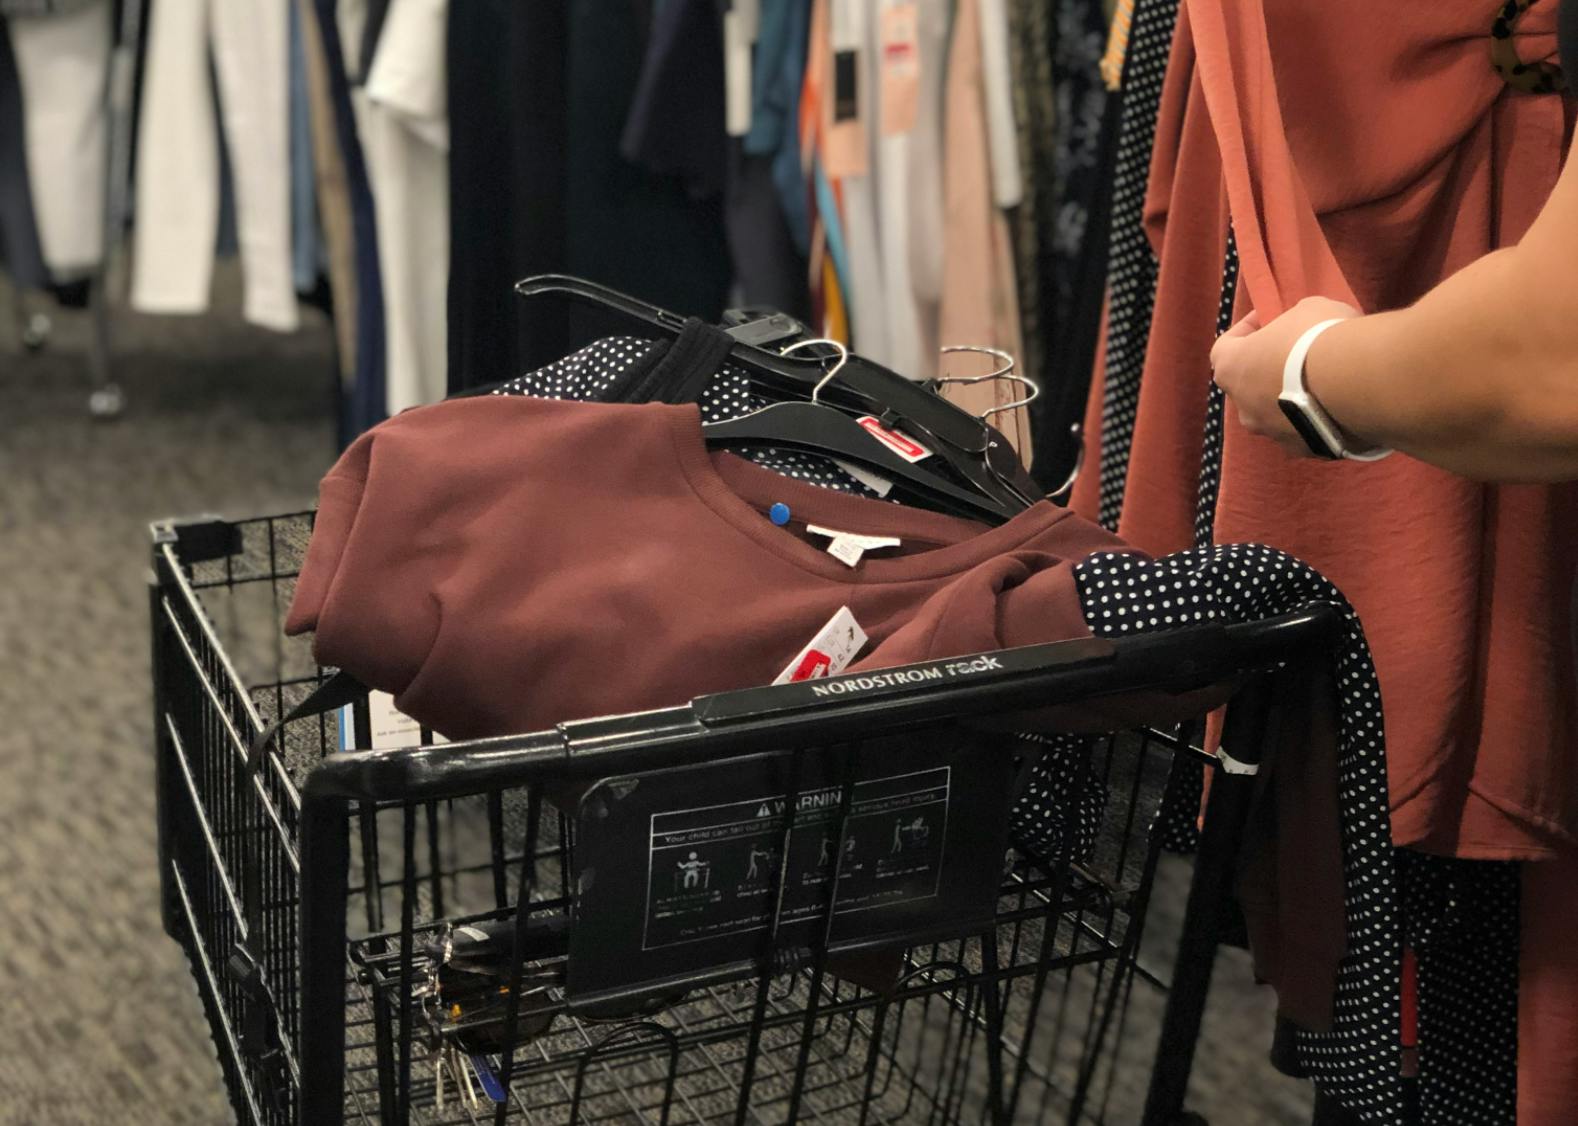 Nordstrom Rack Is Having an Early Black Friday Sale on Bags With